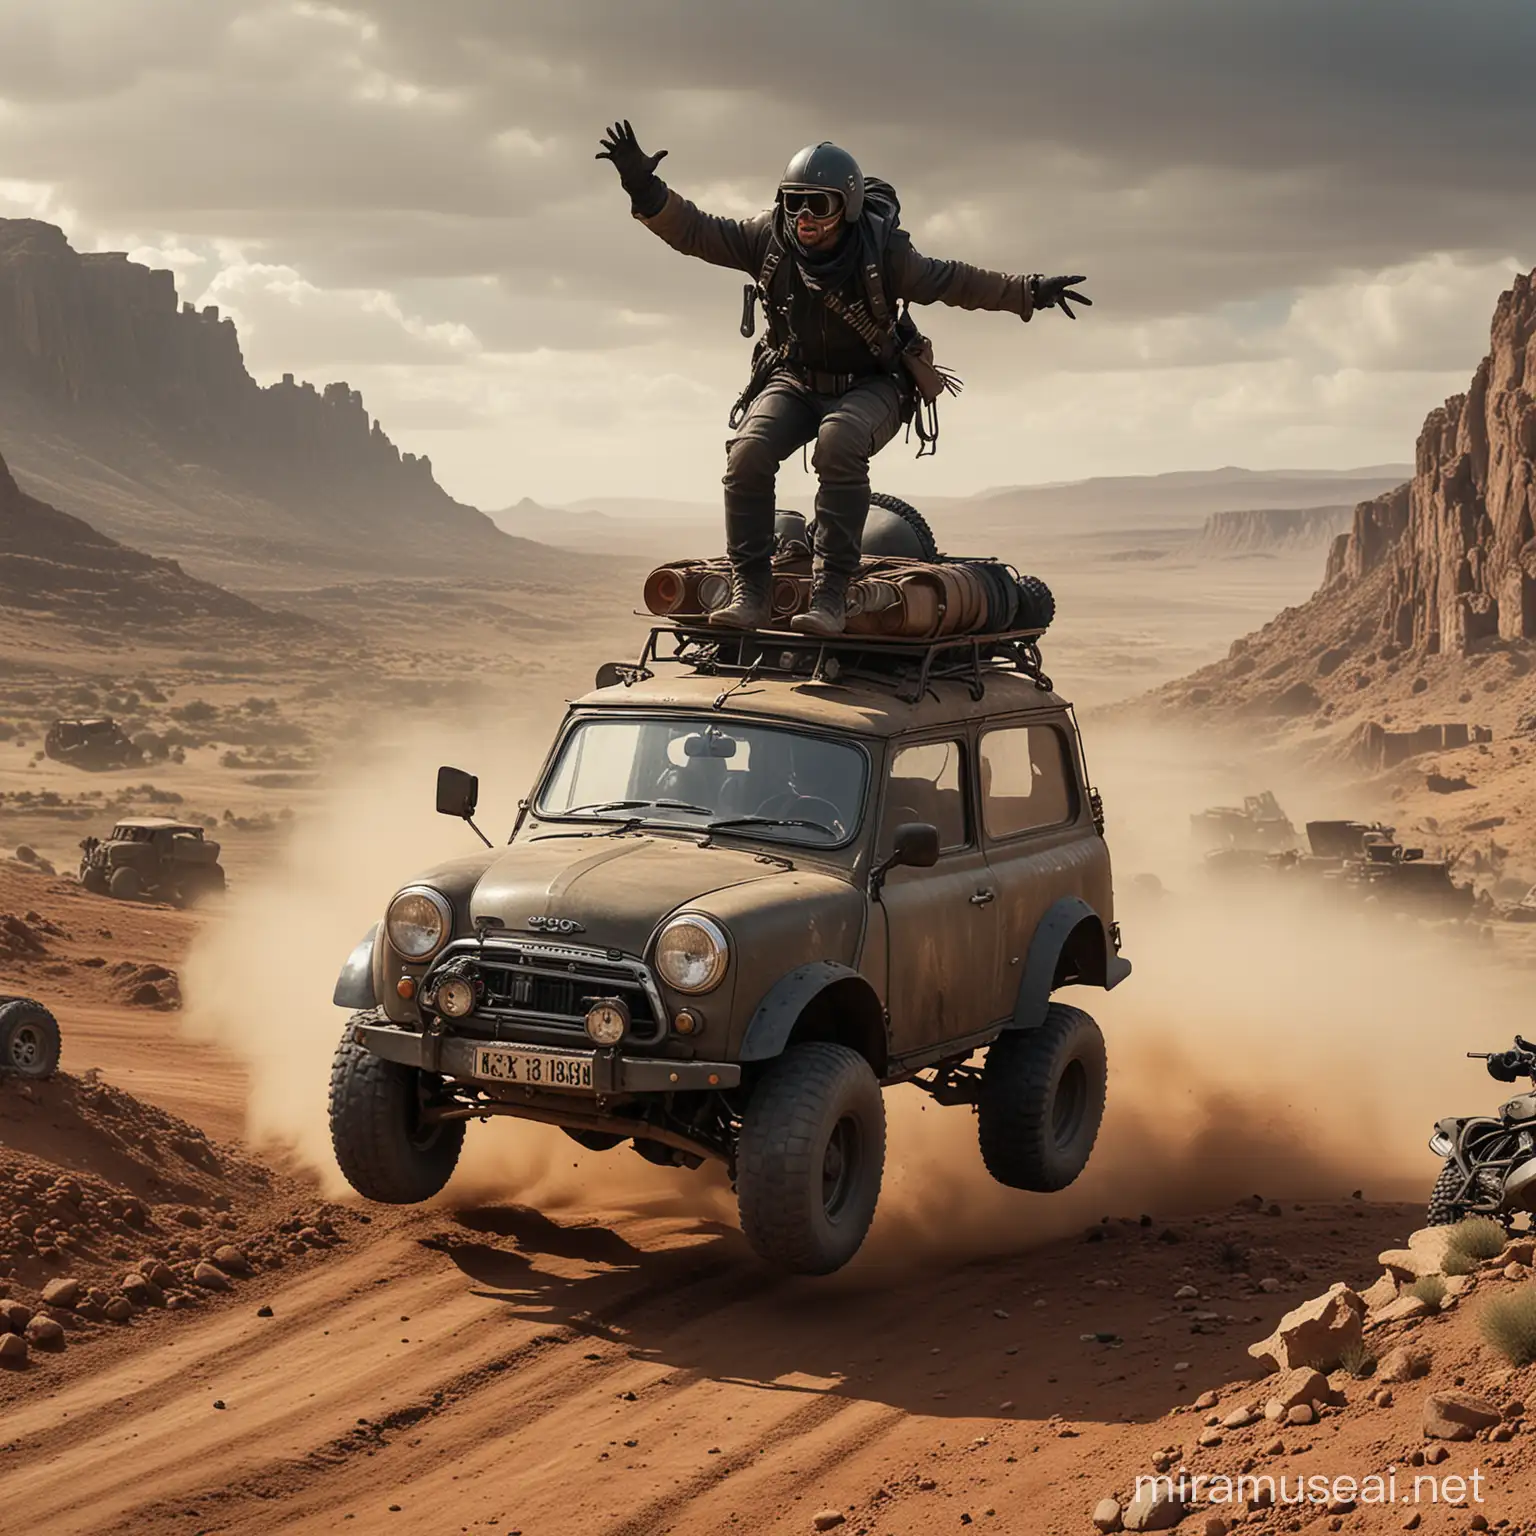 Mad Max Style Mini Austin Classic Jumping Over Hill in PostApocalyptic World